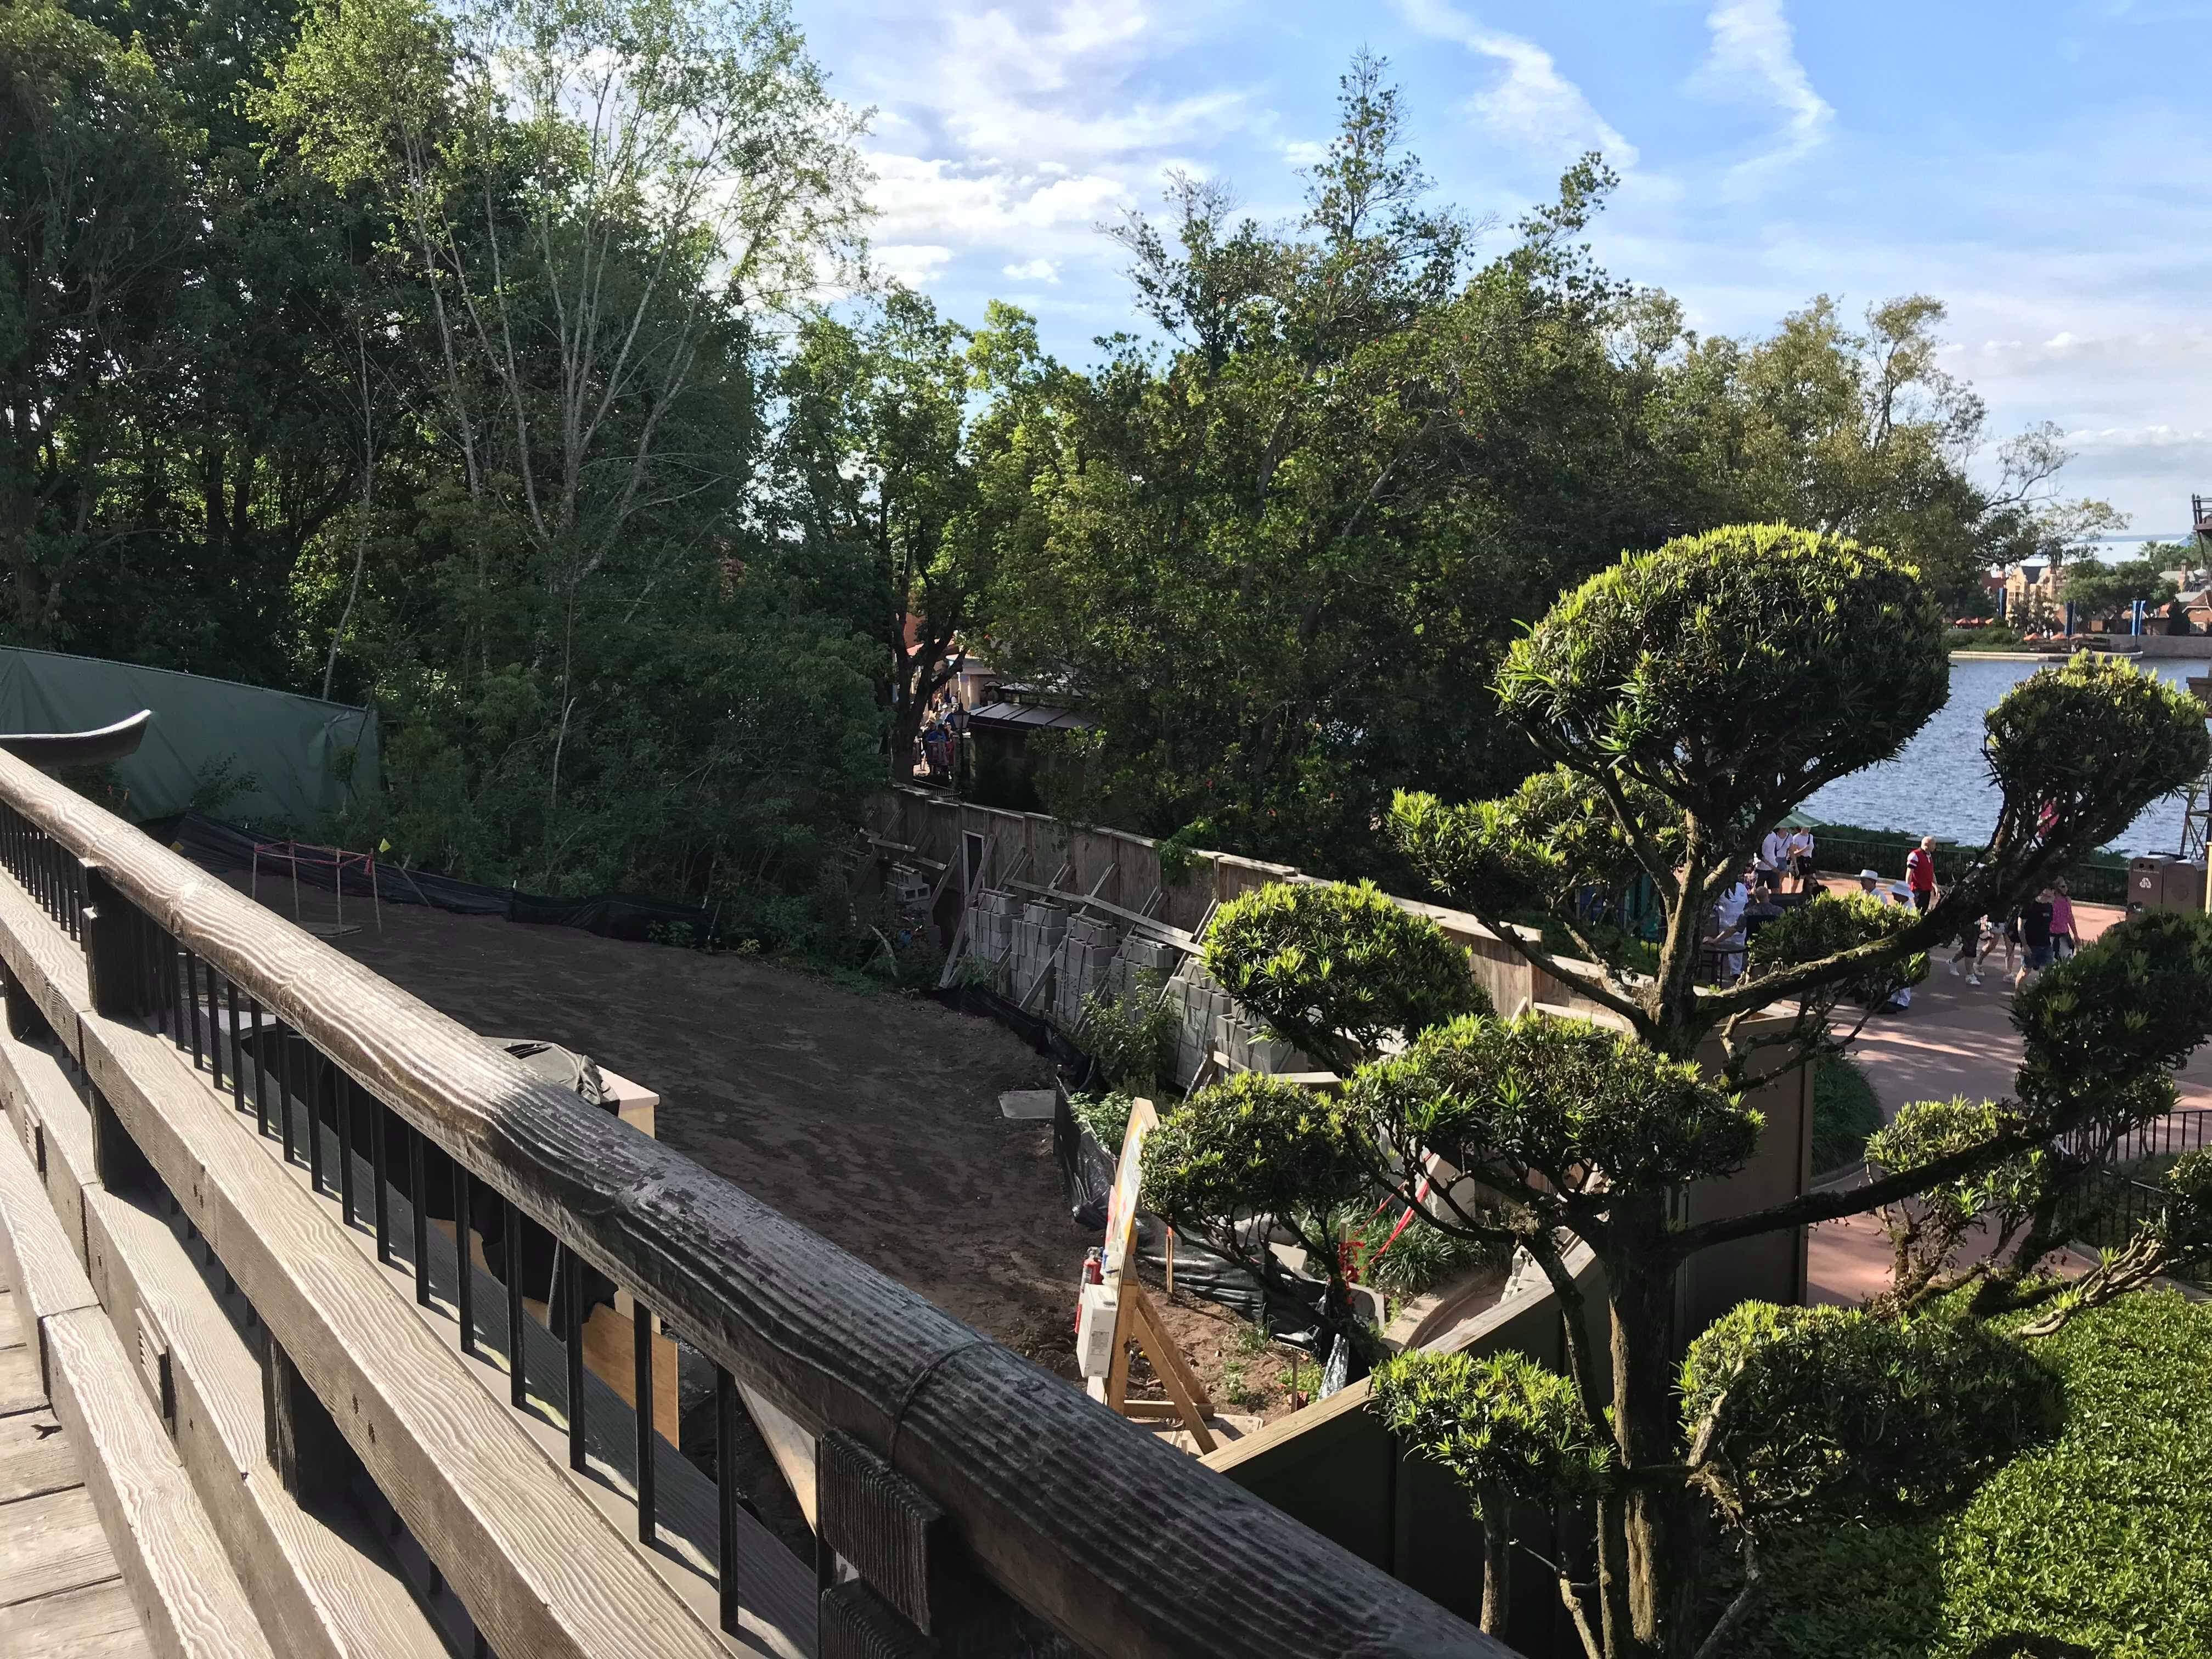 Construction Update: New Dining Location Coming to Epcot’s Japan Pavilion